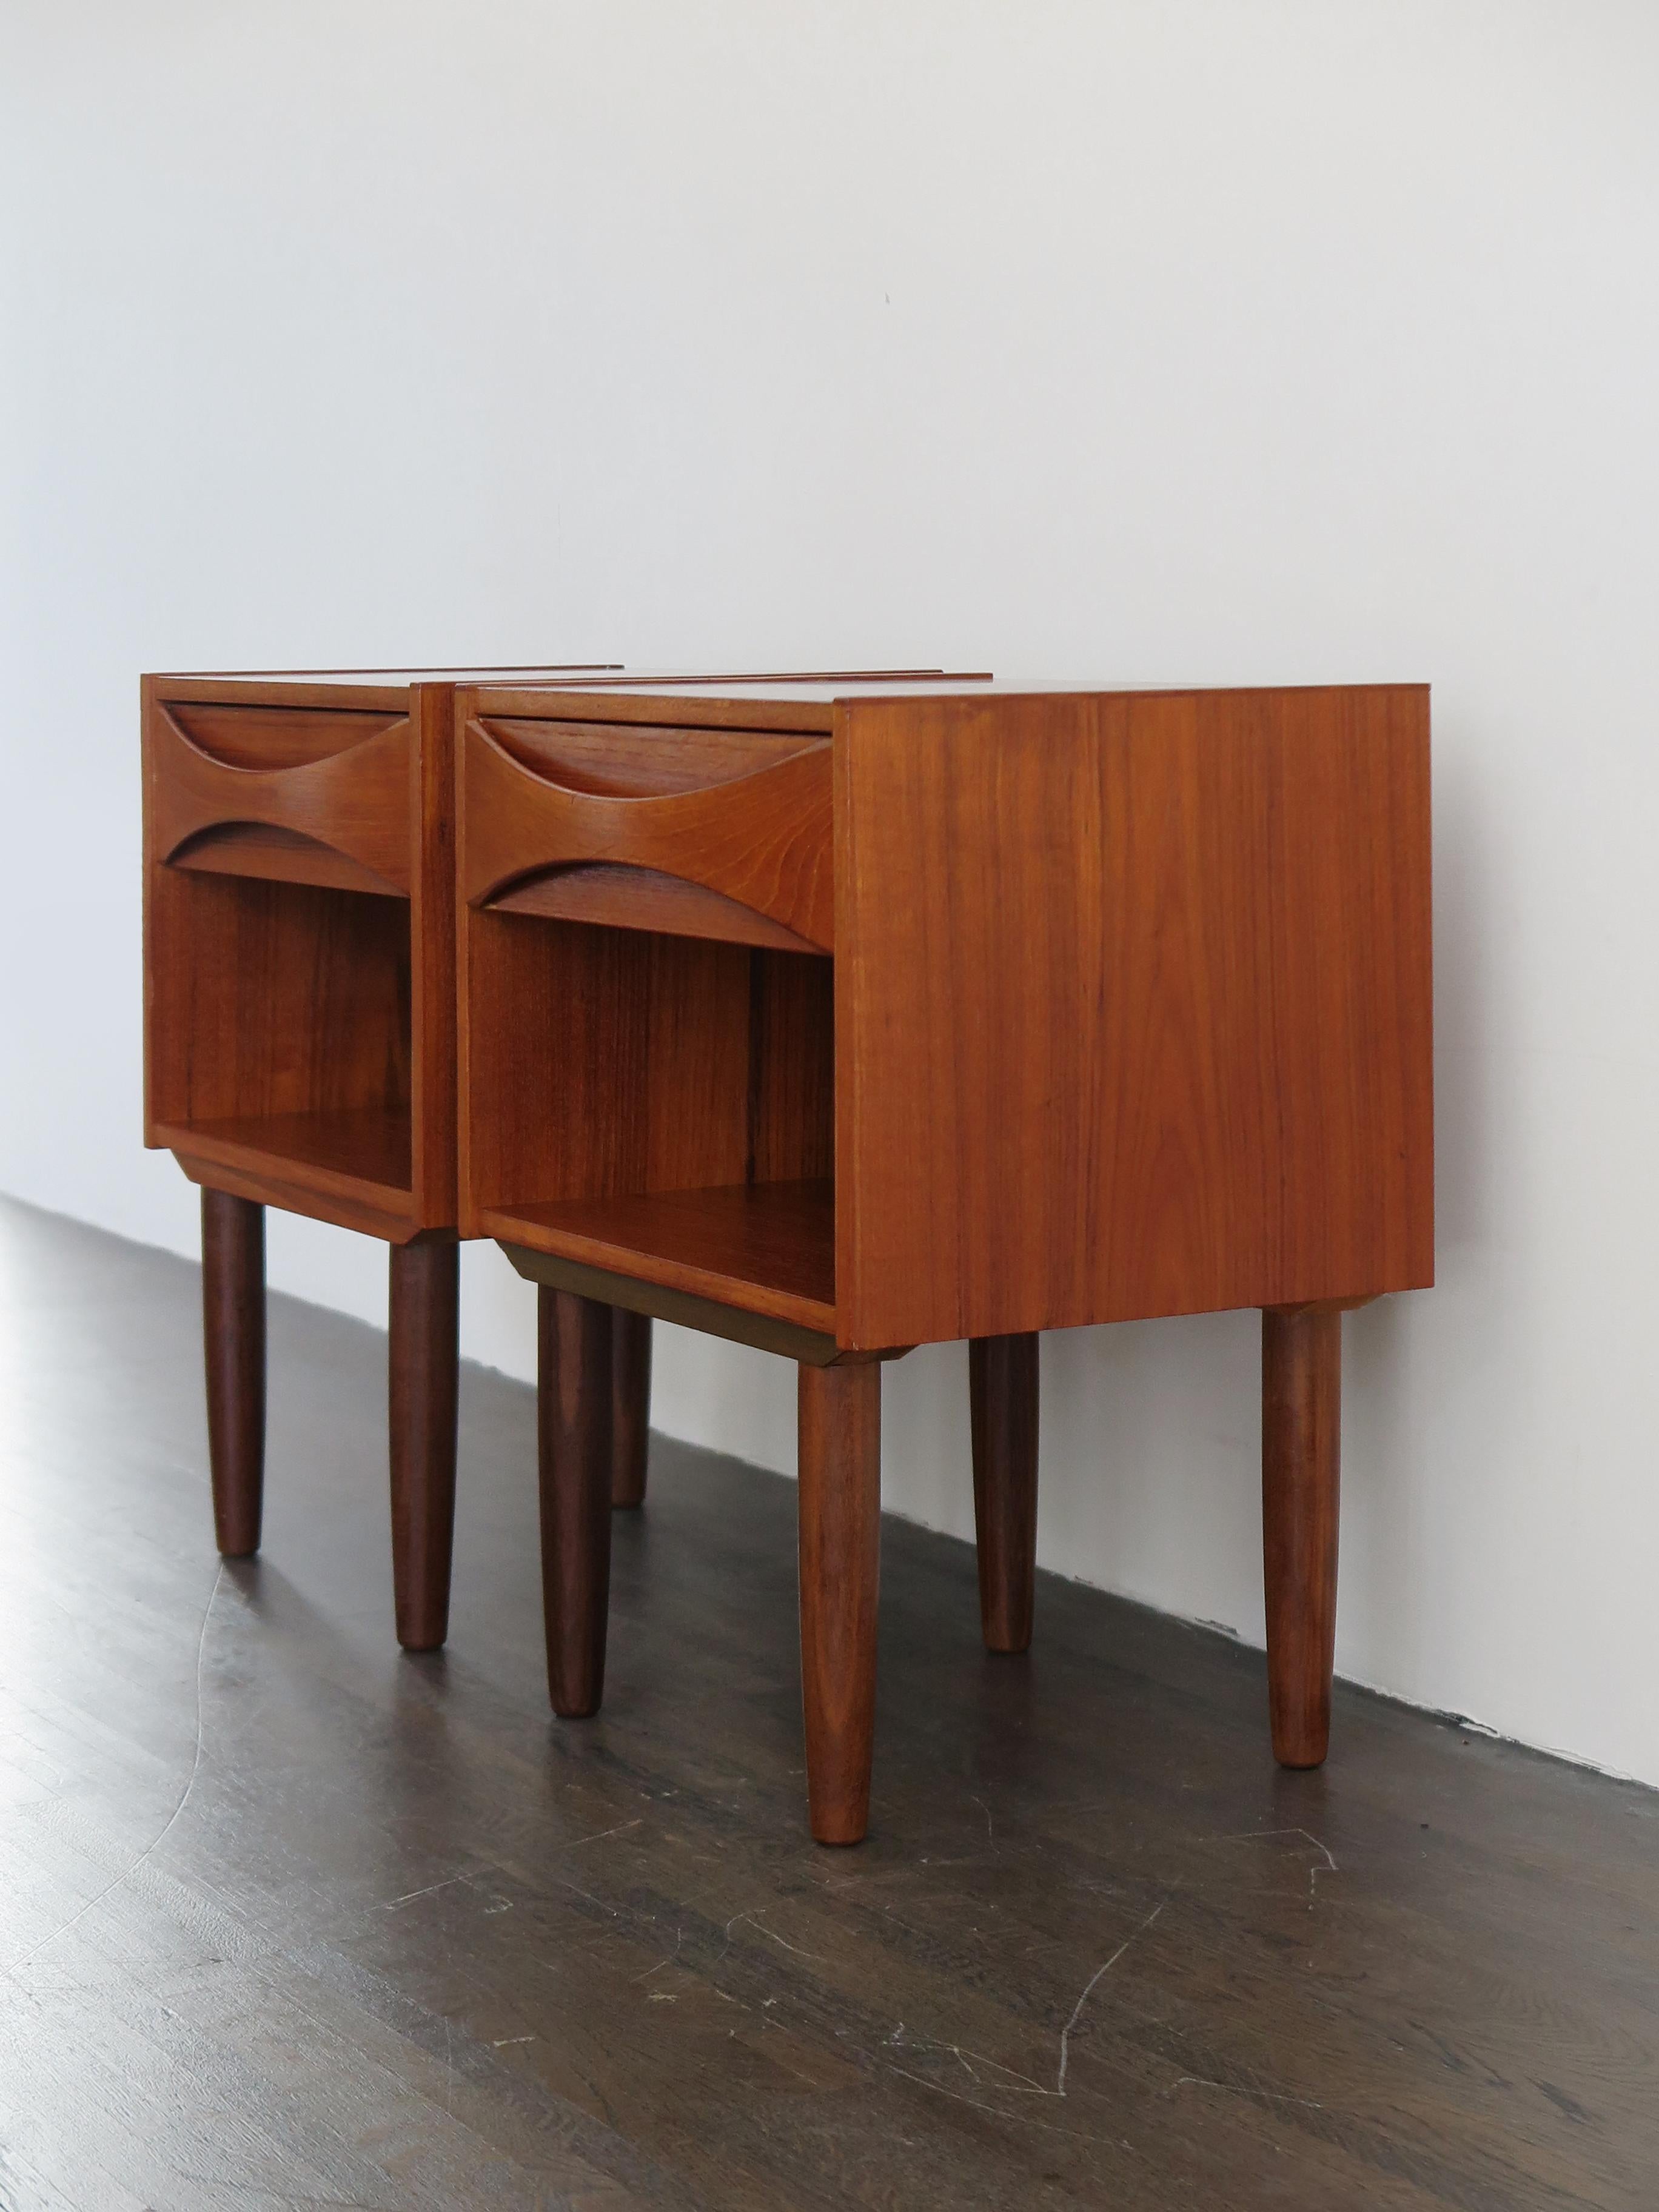 Set of two Scandinavian Mid-Century Modern design teak nightstands
Designed by Arne Vodder and produced in Denmark from circa 1950.

Please note that the items are original of the period and this shows normal signs of age and use.